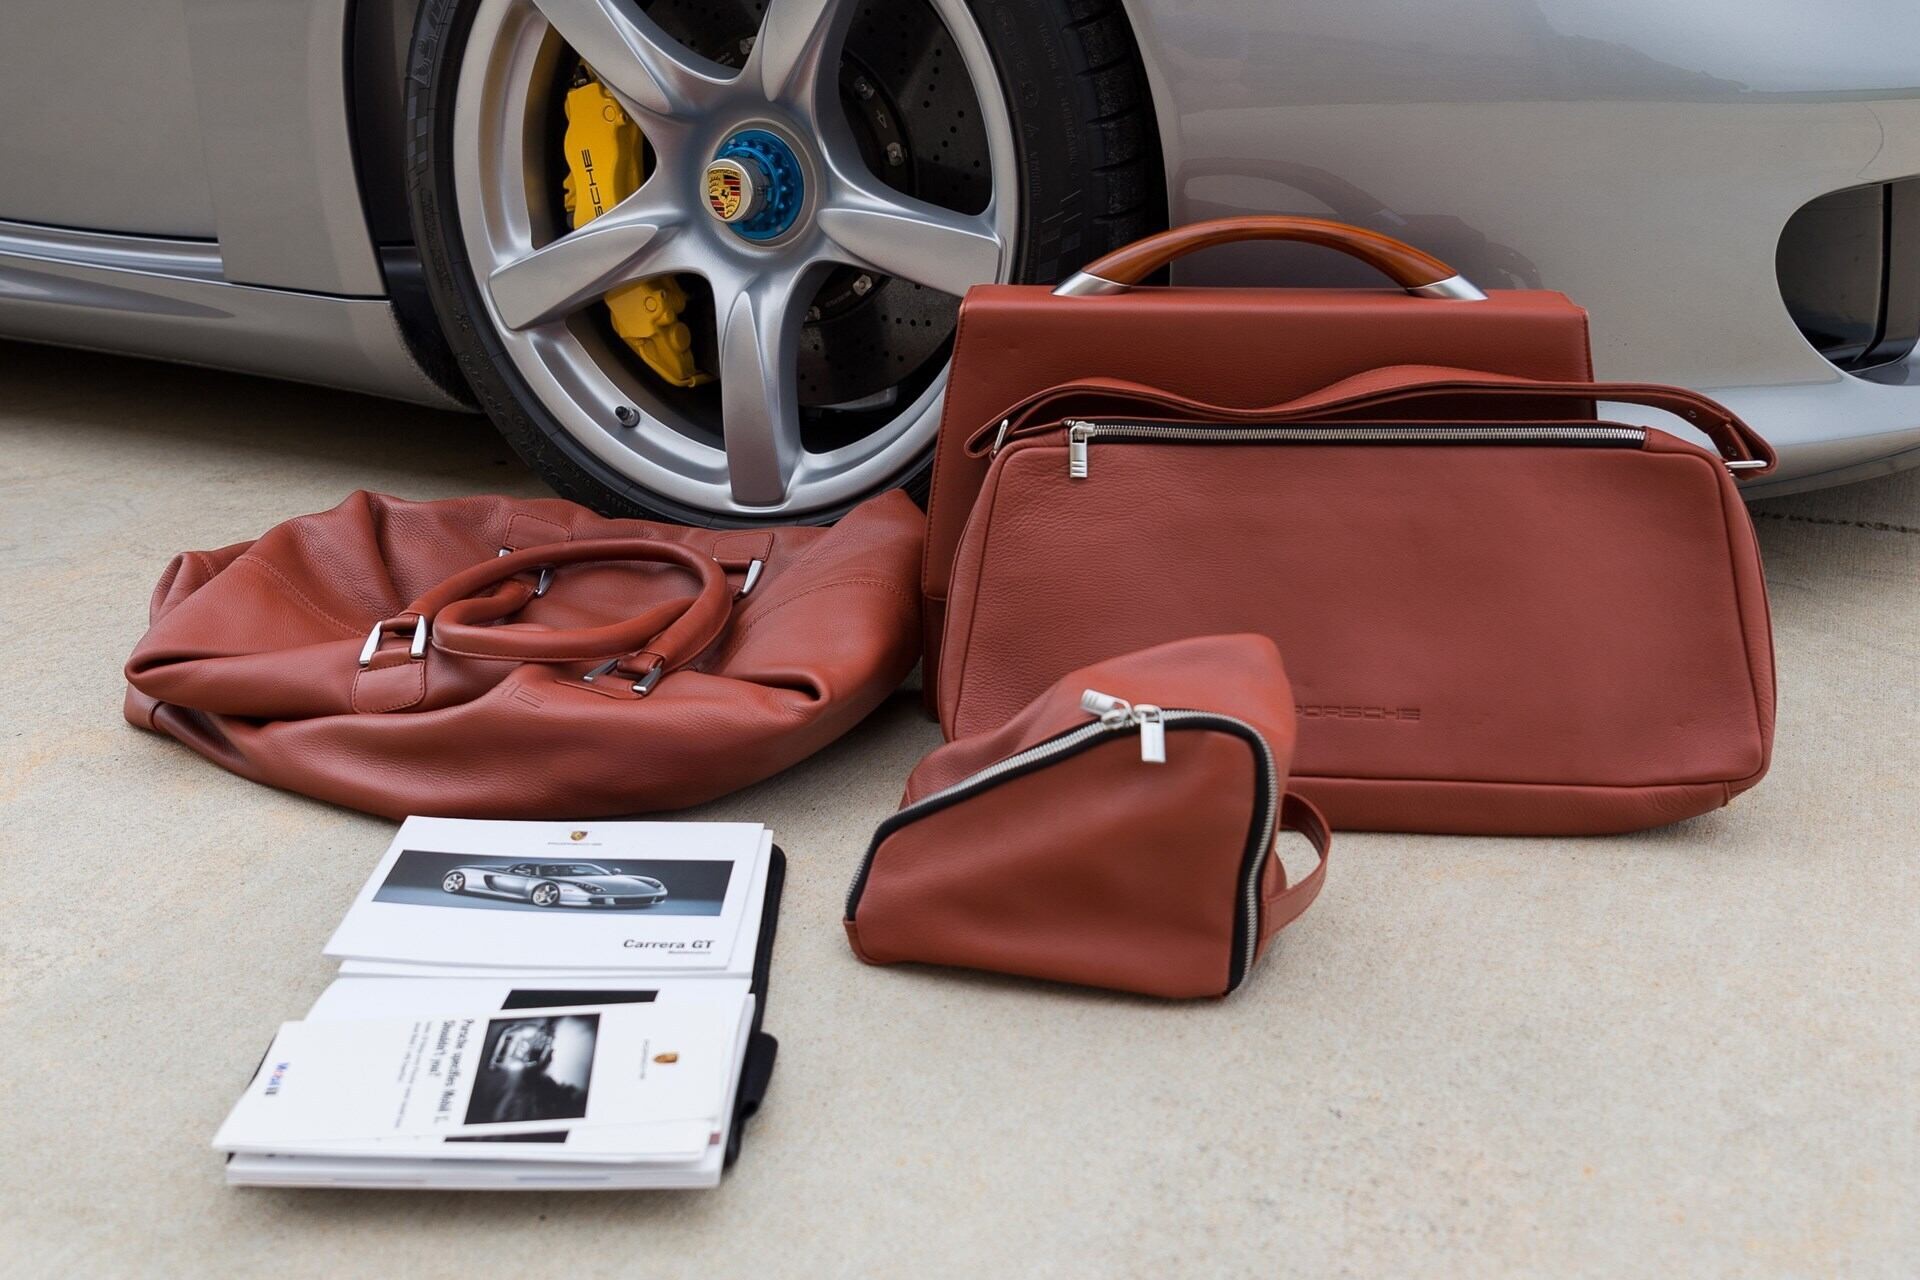 Image showing the owner's manuals and luggage set of a silver 2005 Porsche Carrera GT